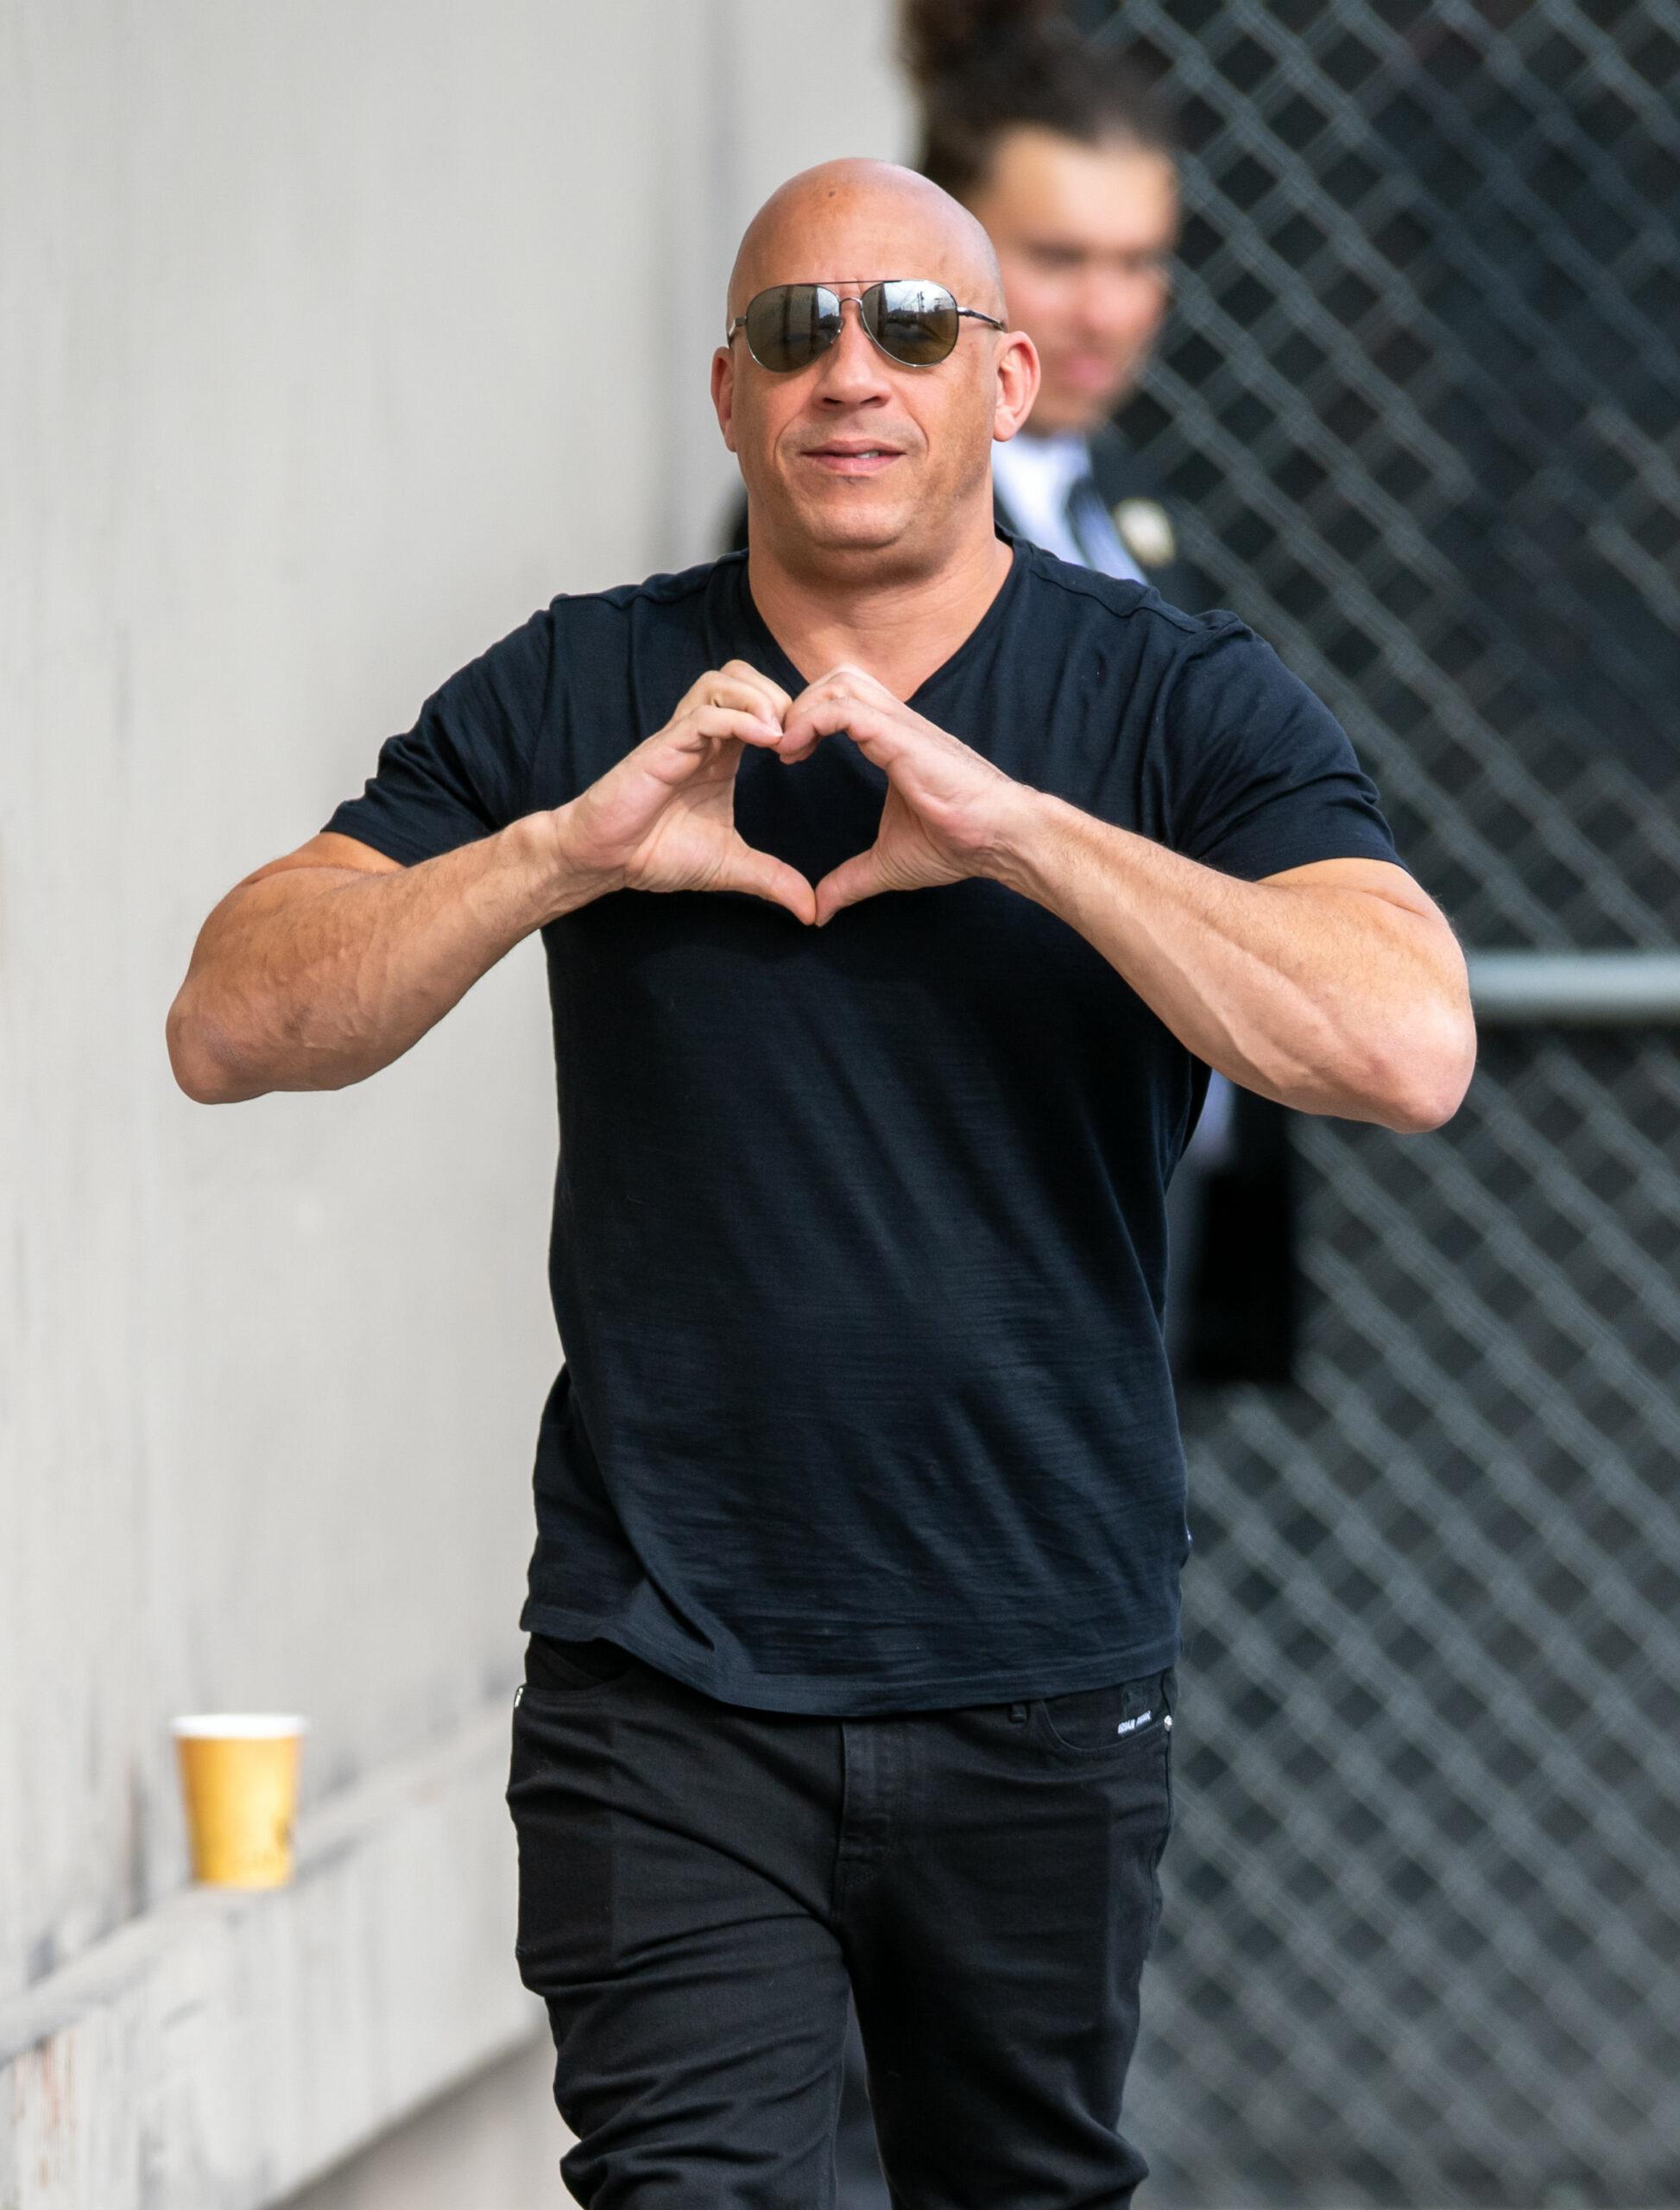 Vin Diesel is seen at 'Jimmy Kimmel Live' in Los Angeles, California. NON-EXCLUSIVE March 09, 2020 200309RB1 Los Angeles, CA www.bauergriffin.com. 09 Mar 2020 Pictured: Vin Diesel. Photo credit: RB/Bauergriffin.com / MEGA TheMegaAgency.com +1 888 505 6342 (Mega Agency TagID: MEGA627226_001.jpg) [Photo via Mega Agency]